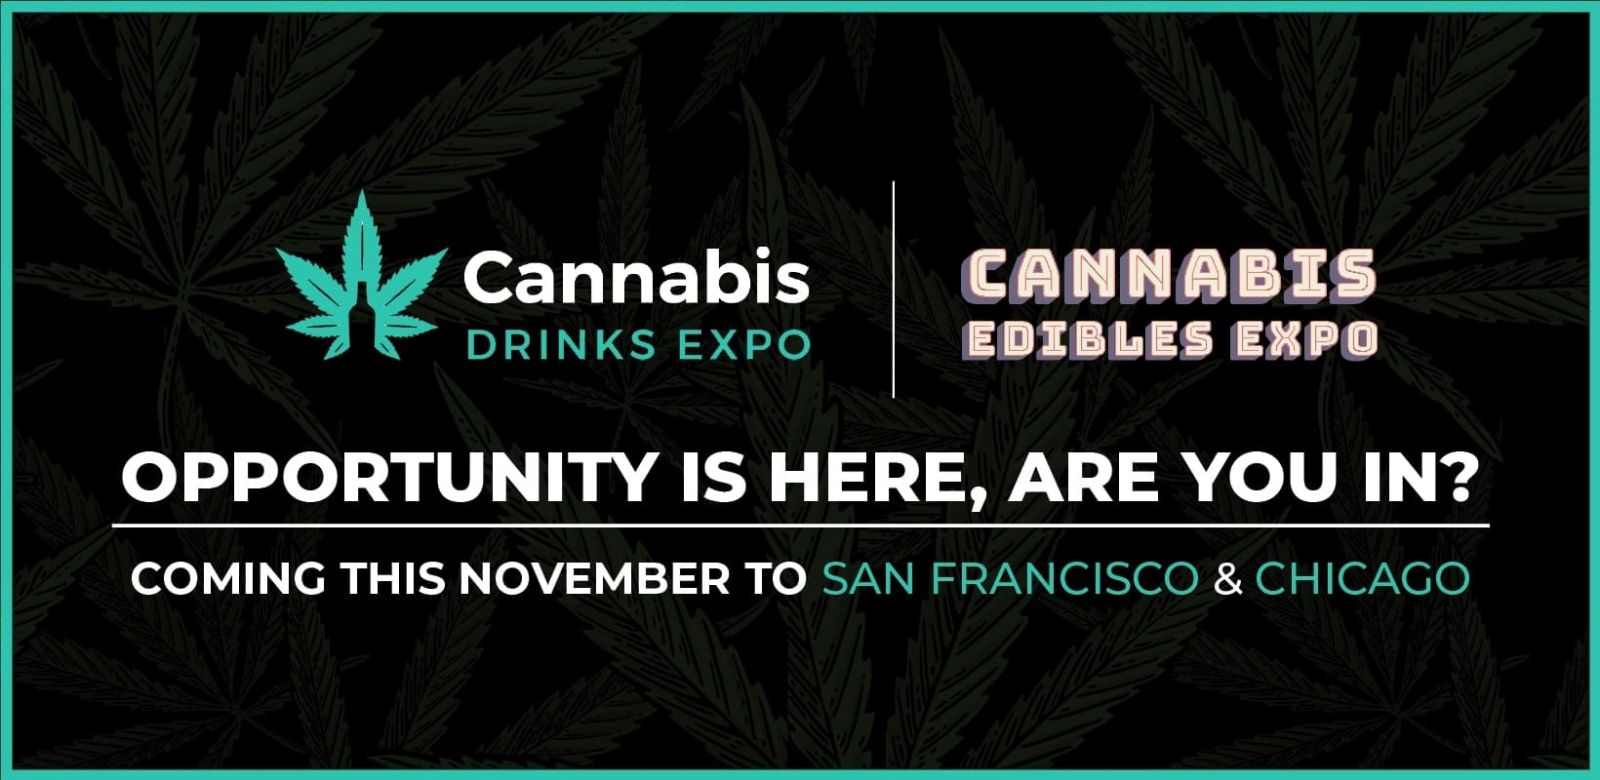 Photo for: This November, let's explore the fast-paced Cannabis Drinks & Edibles markets